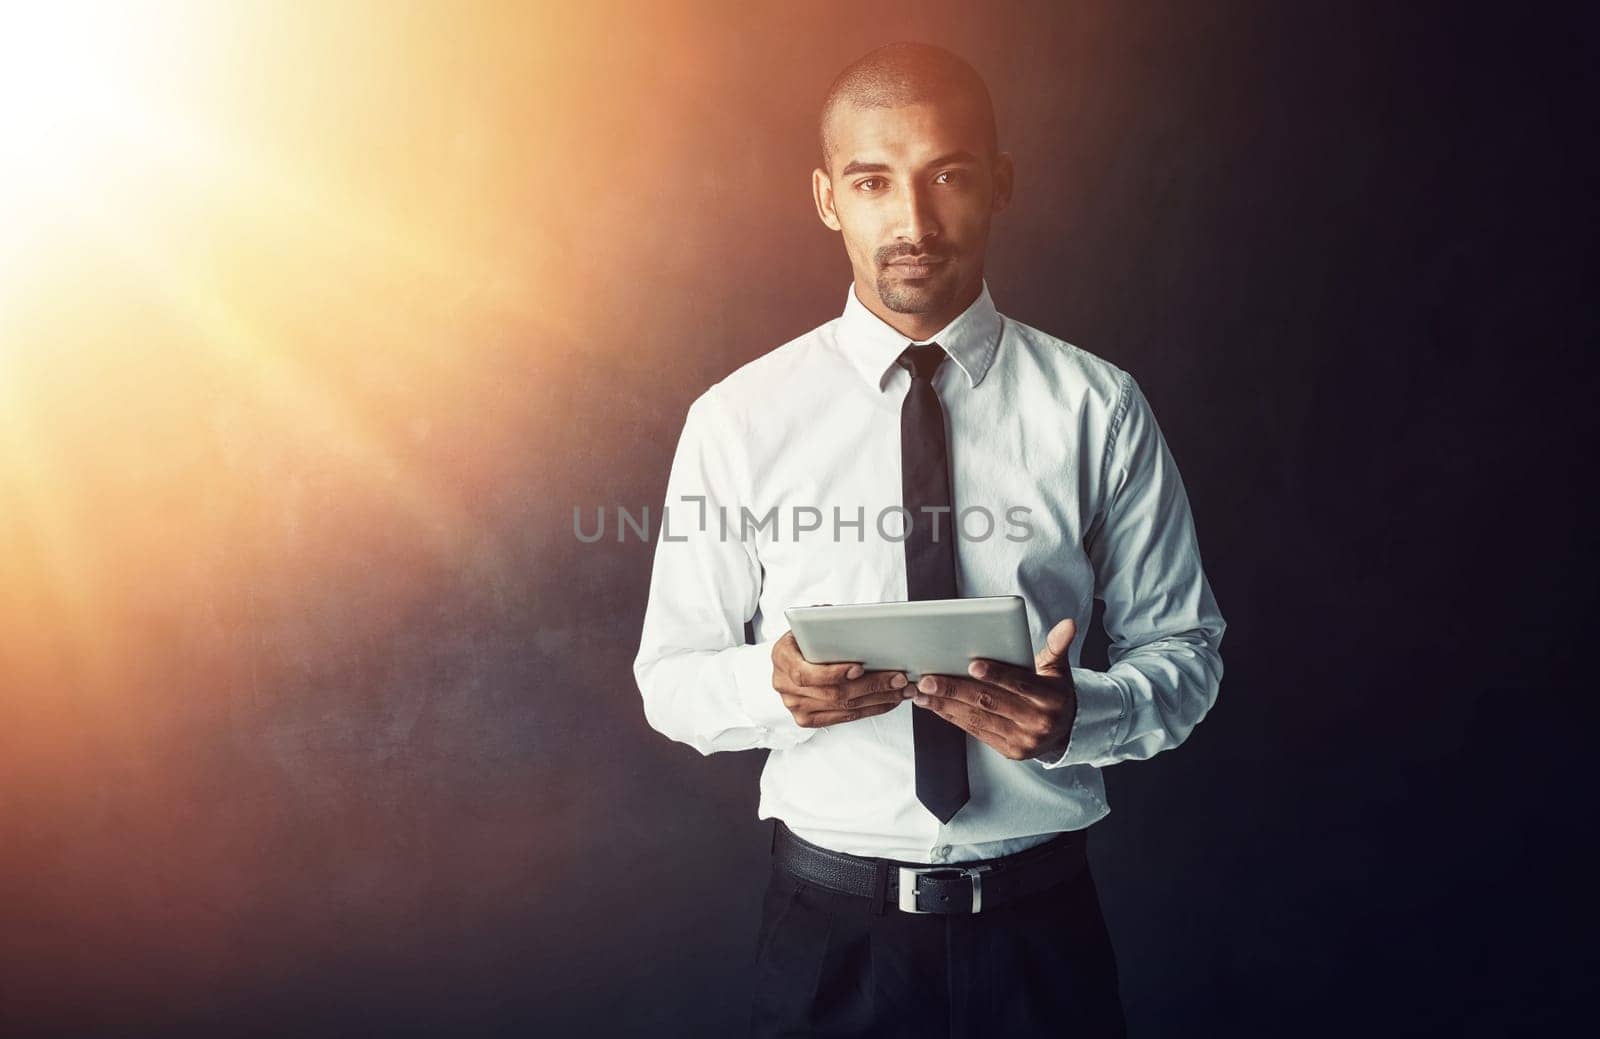 Modern business demands staying connected. Studio portrait of a young businessman using a digital tablet against a dark background